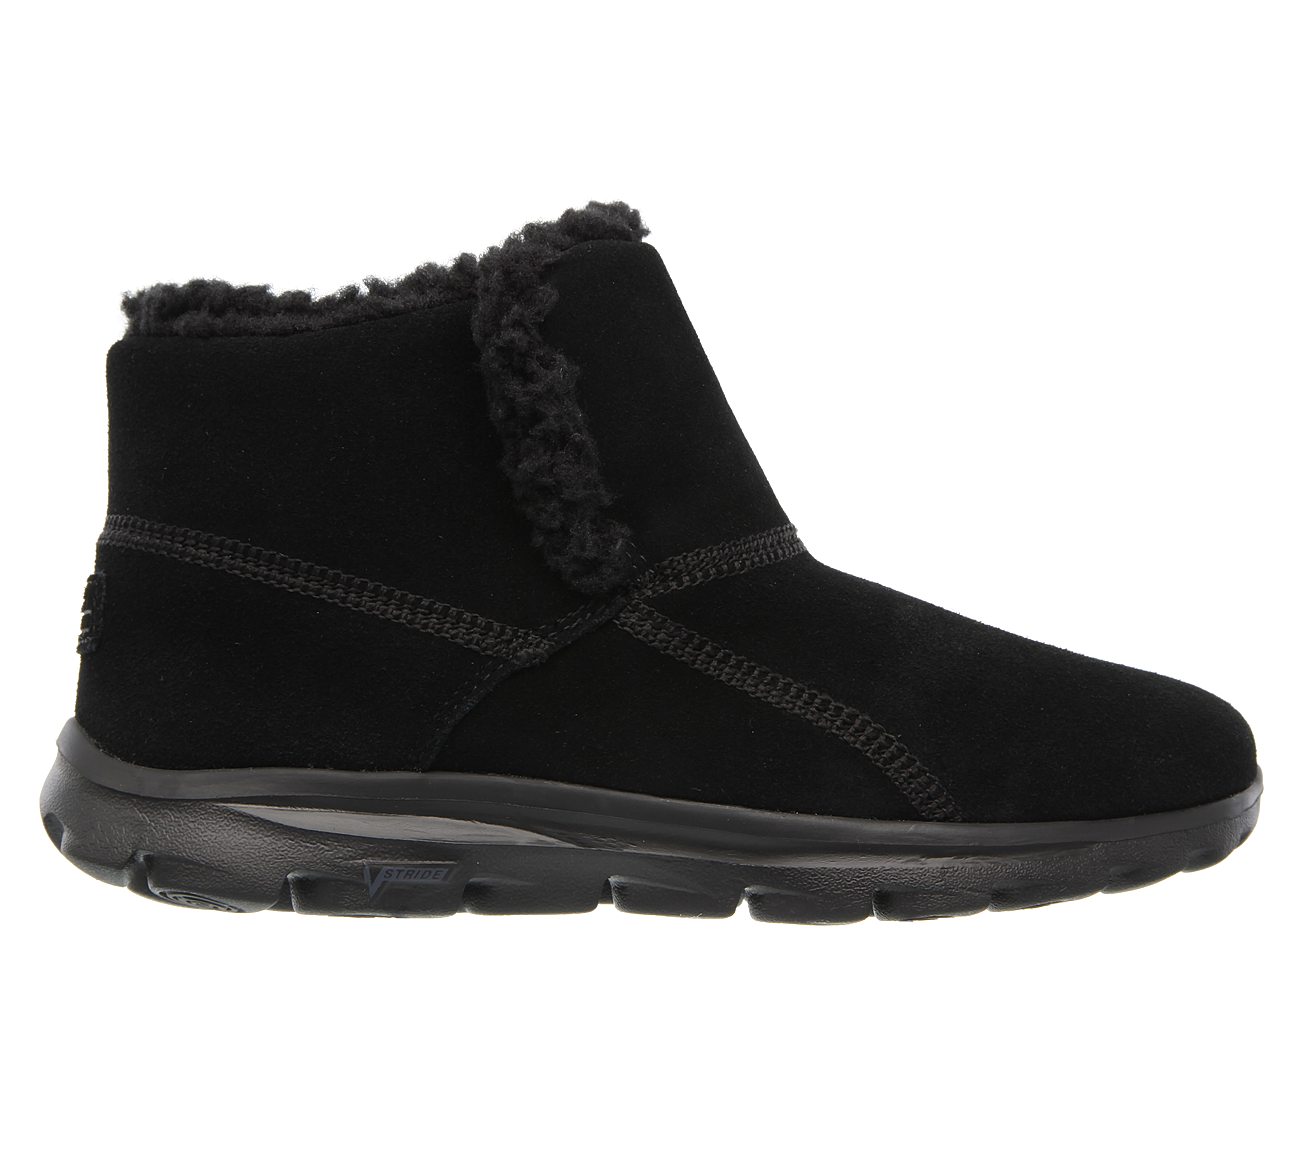 skechers women's on the go chugga comfort boots from finish line